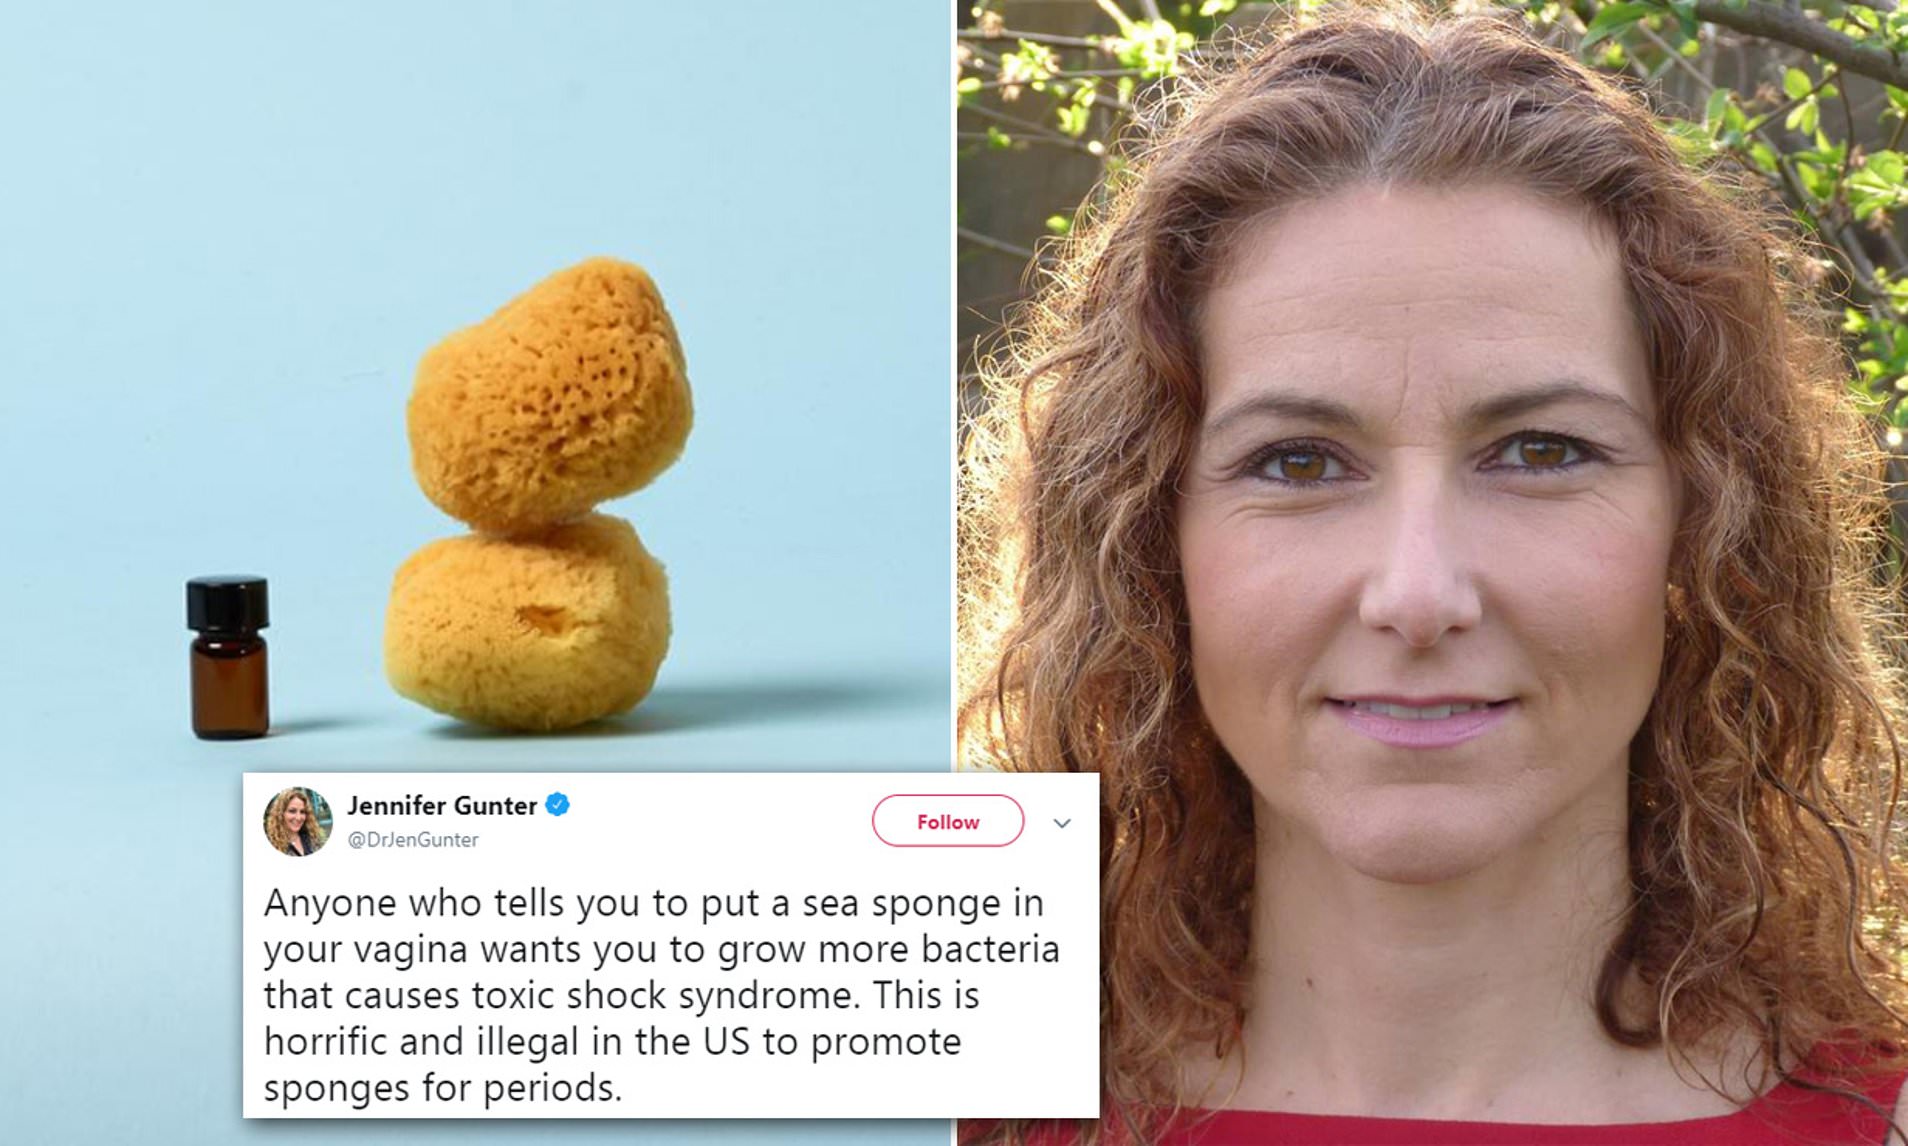 Can you put a sea sponge in your vagina?